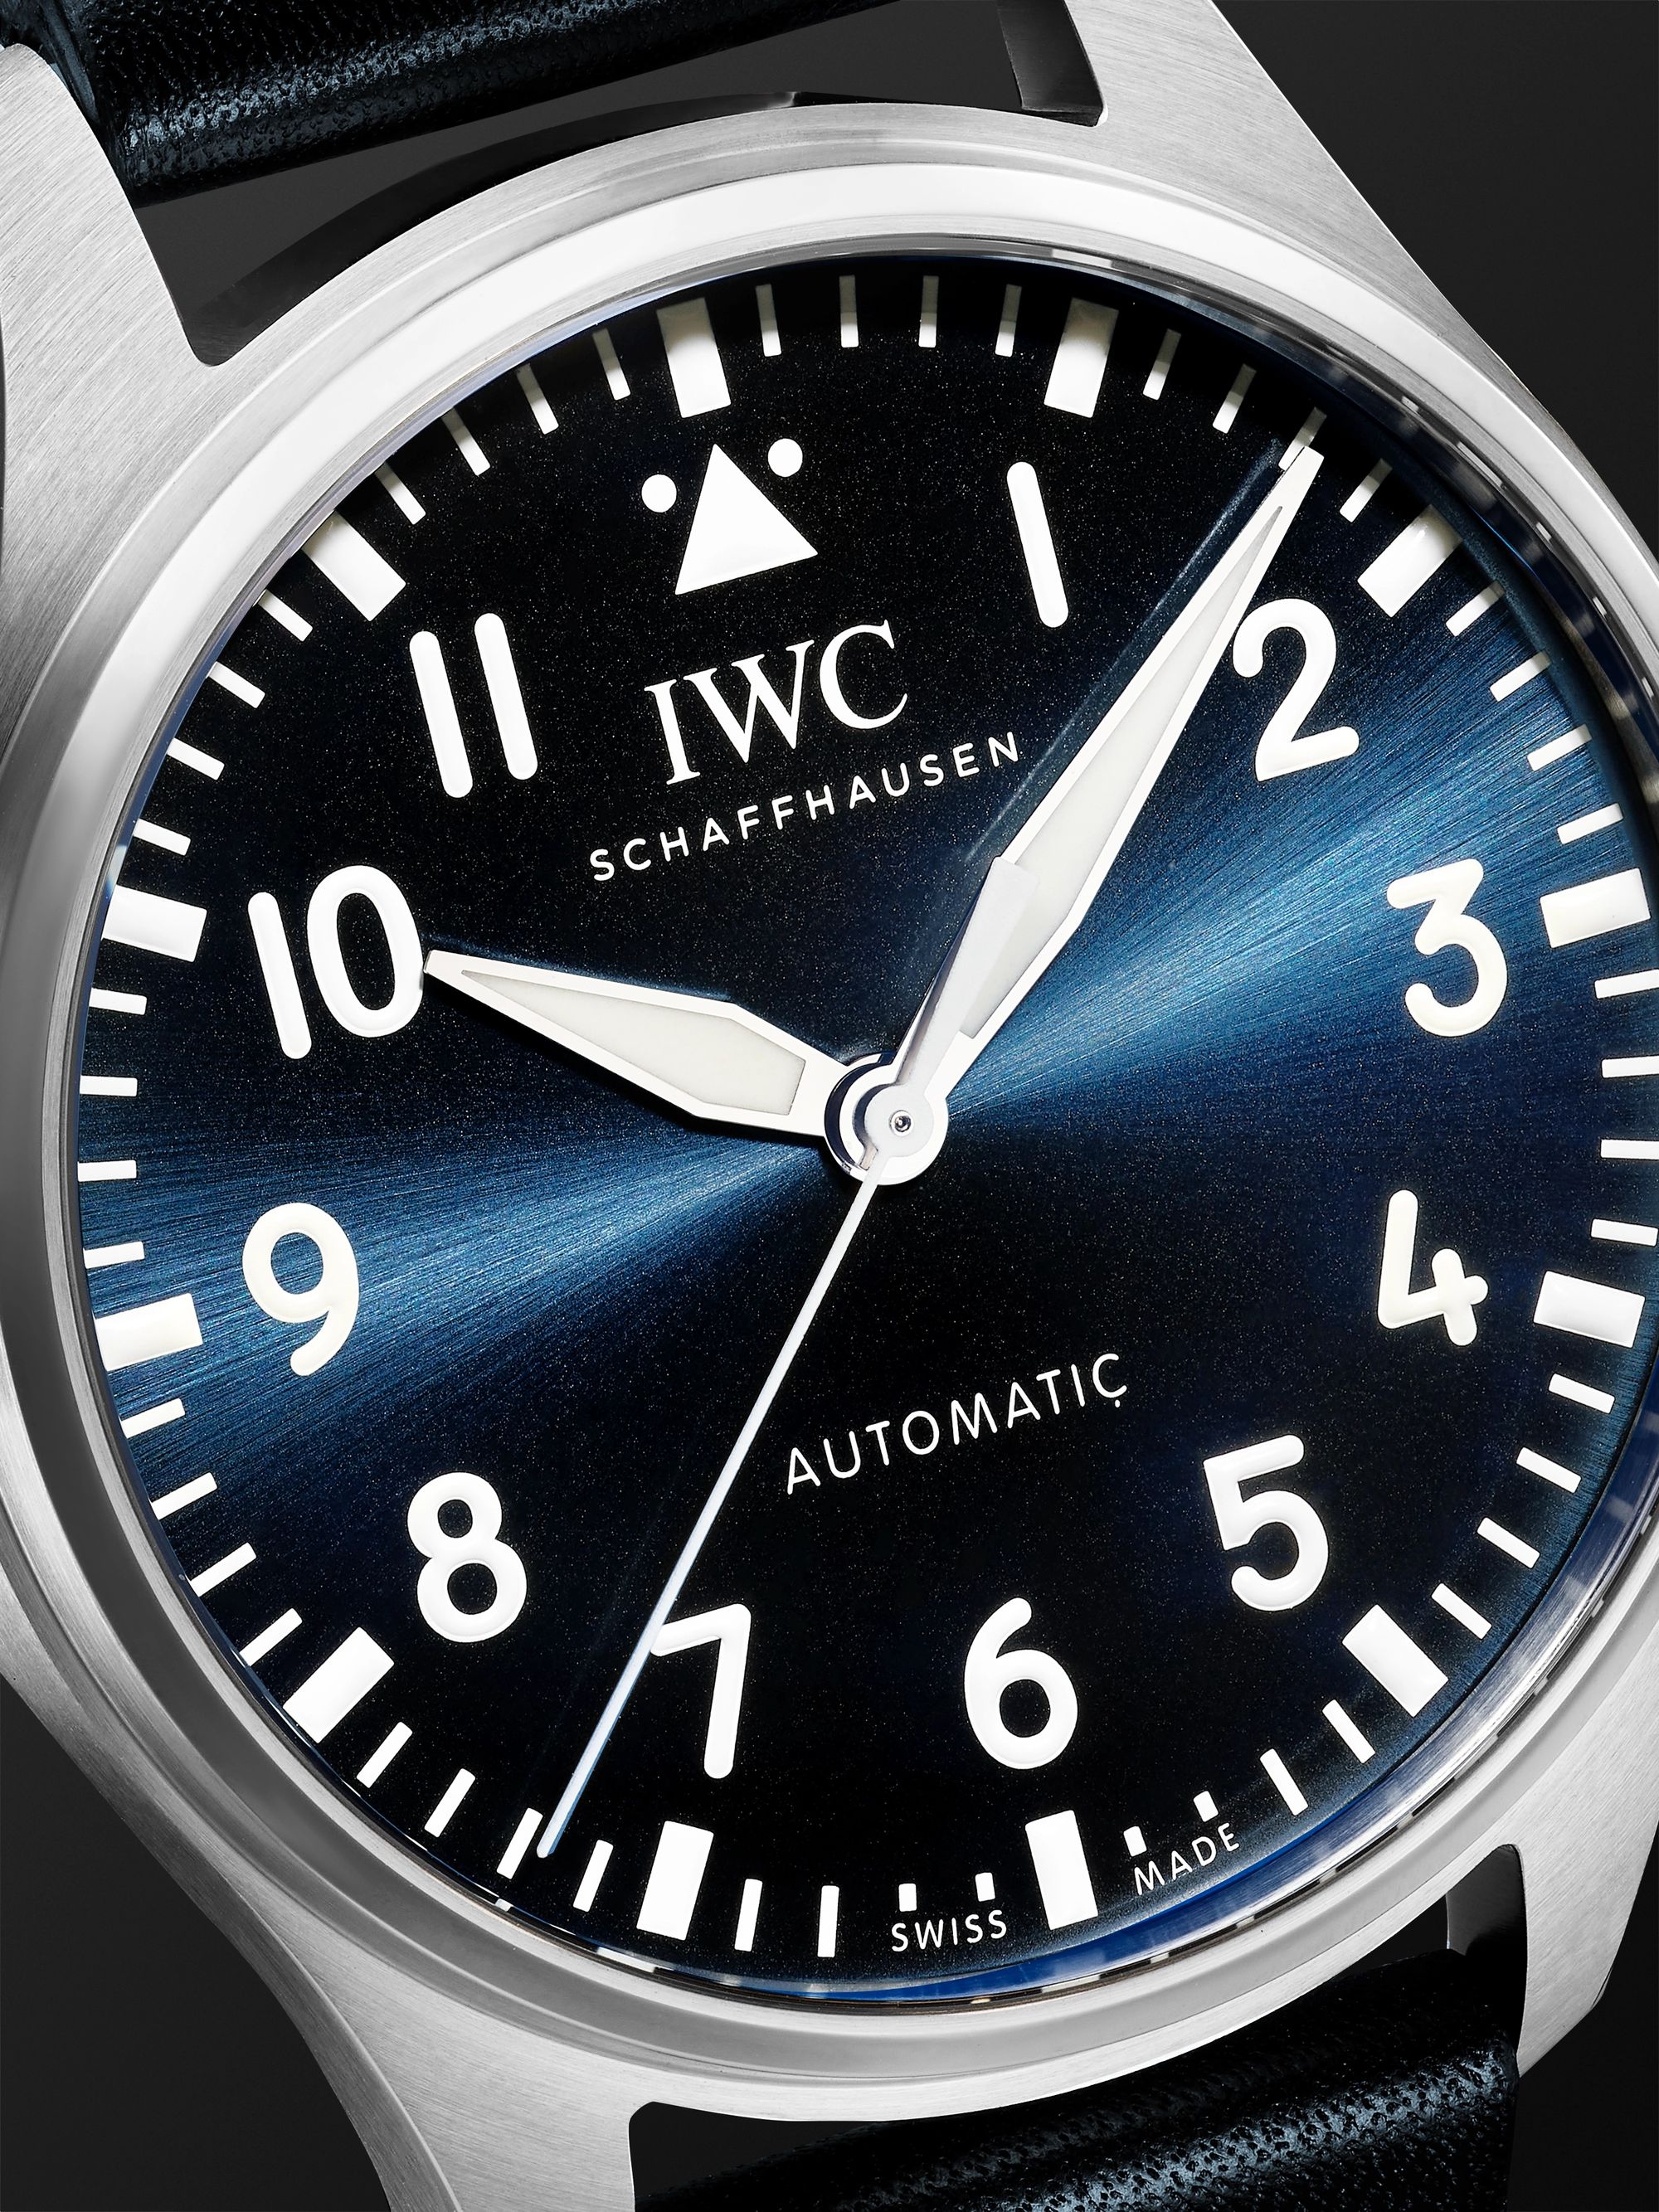 IWC SCHAFFHAUSEN Big Pilot's Automatic 43mm Stainless Steel and Leather Watch, Ref. No. IW329303